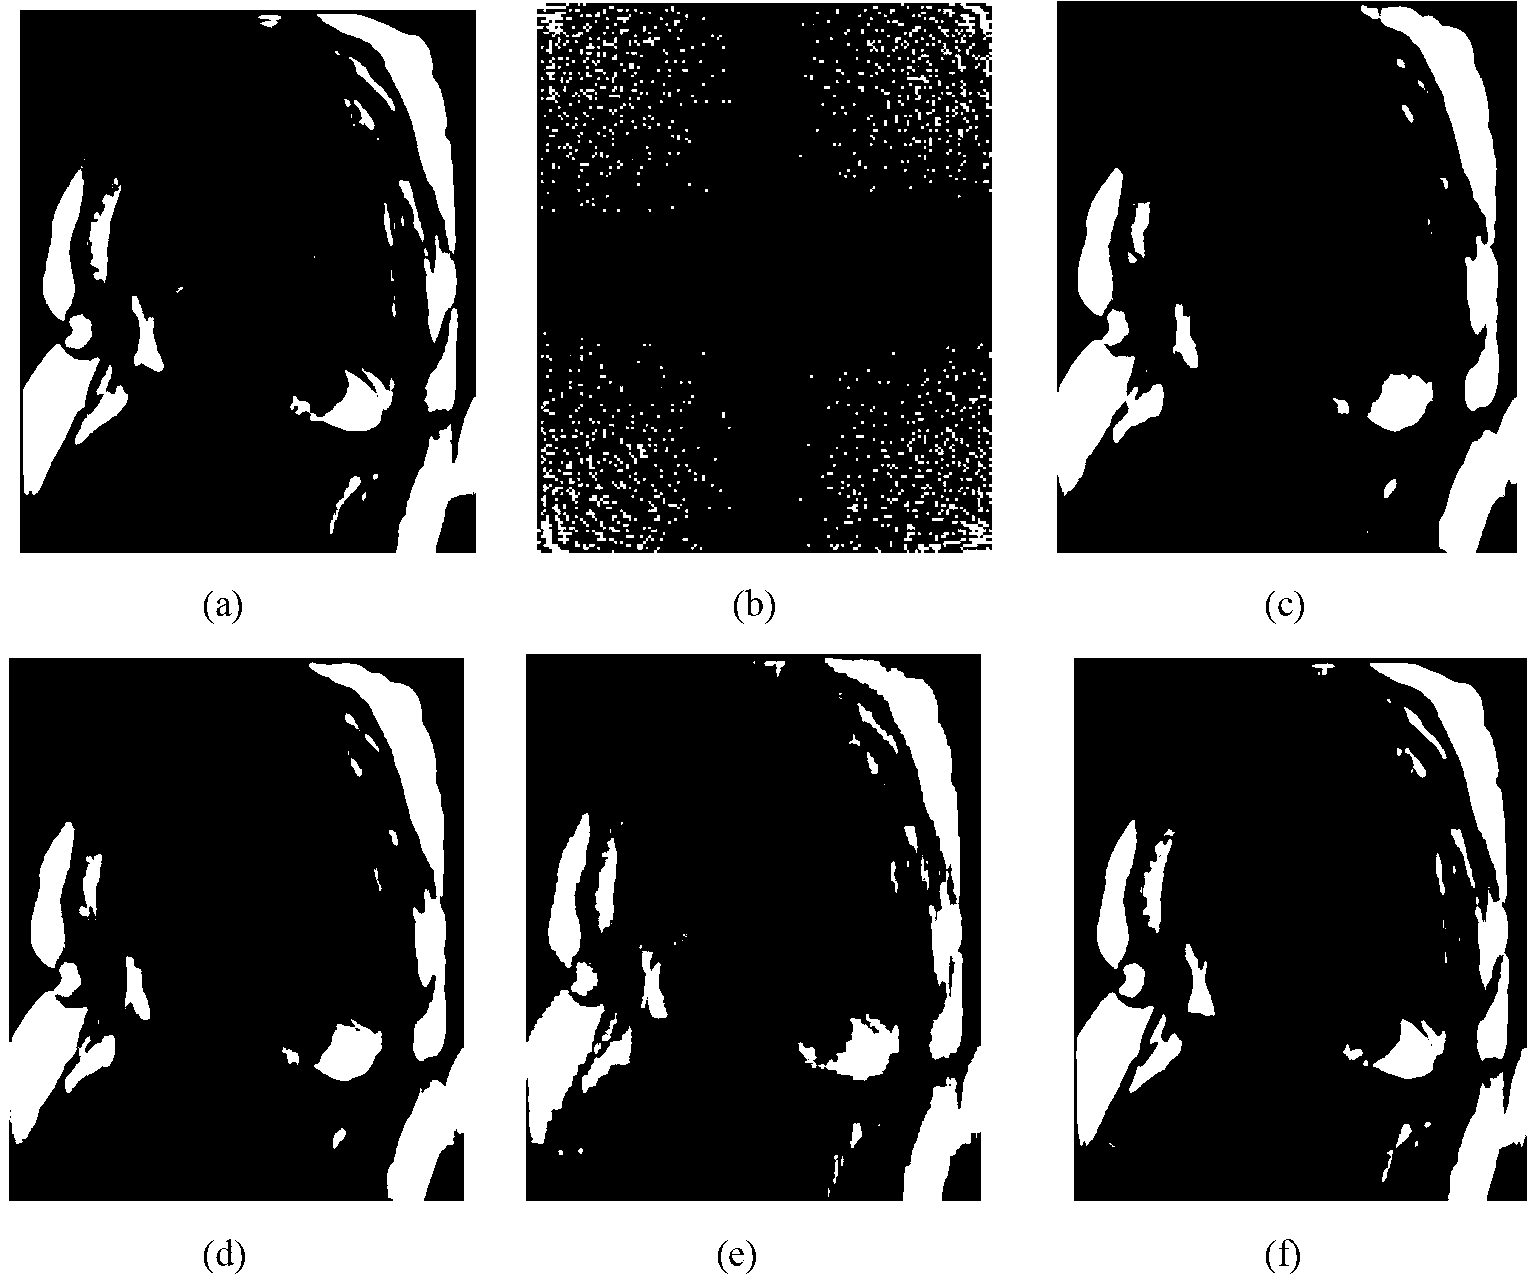 Partial K space sequence image reconstruction method based on self-adapted double-dictionary learning